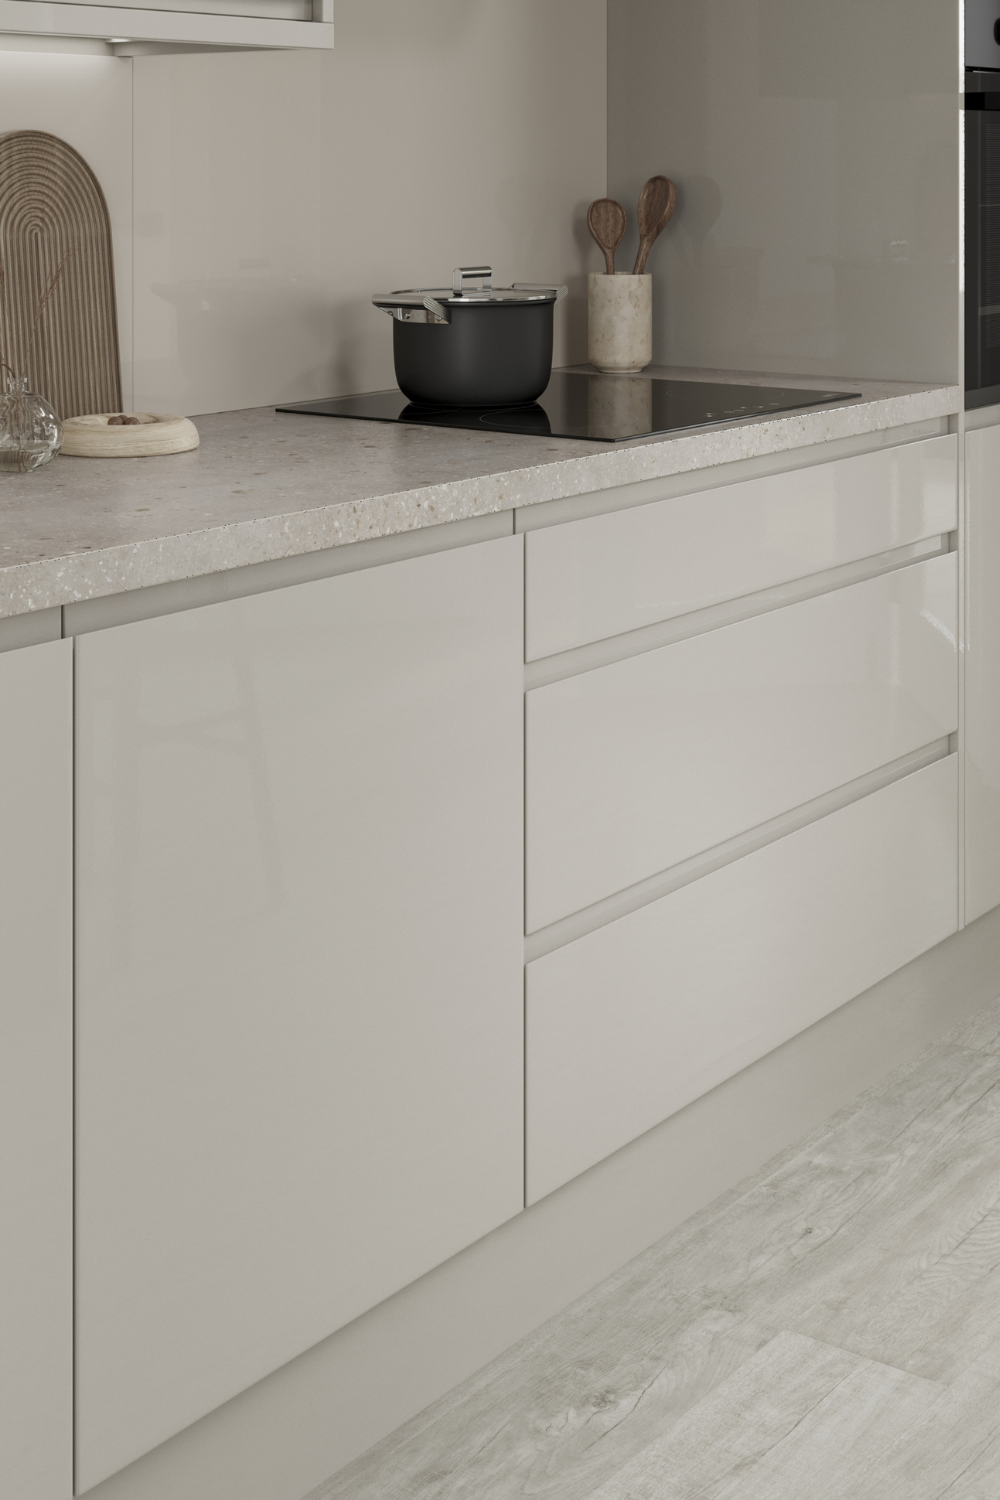 Select the white gloss furniture to
enhance your home’s look